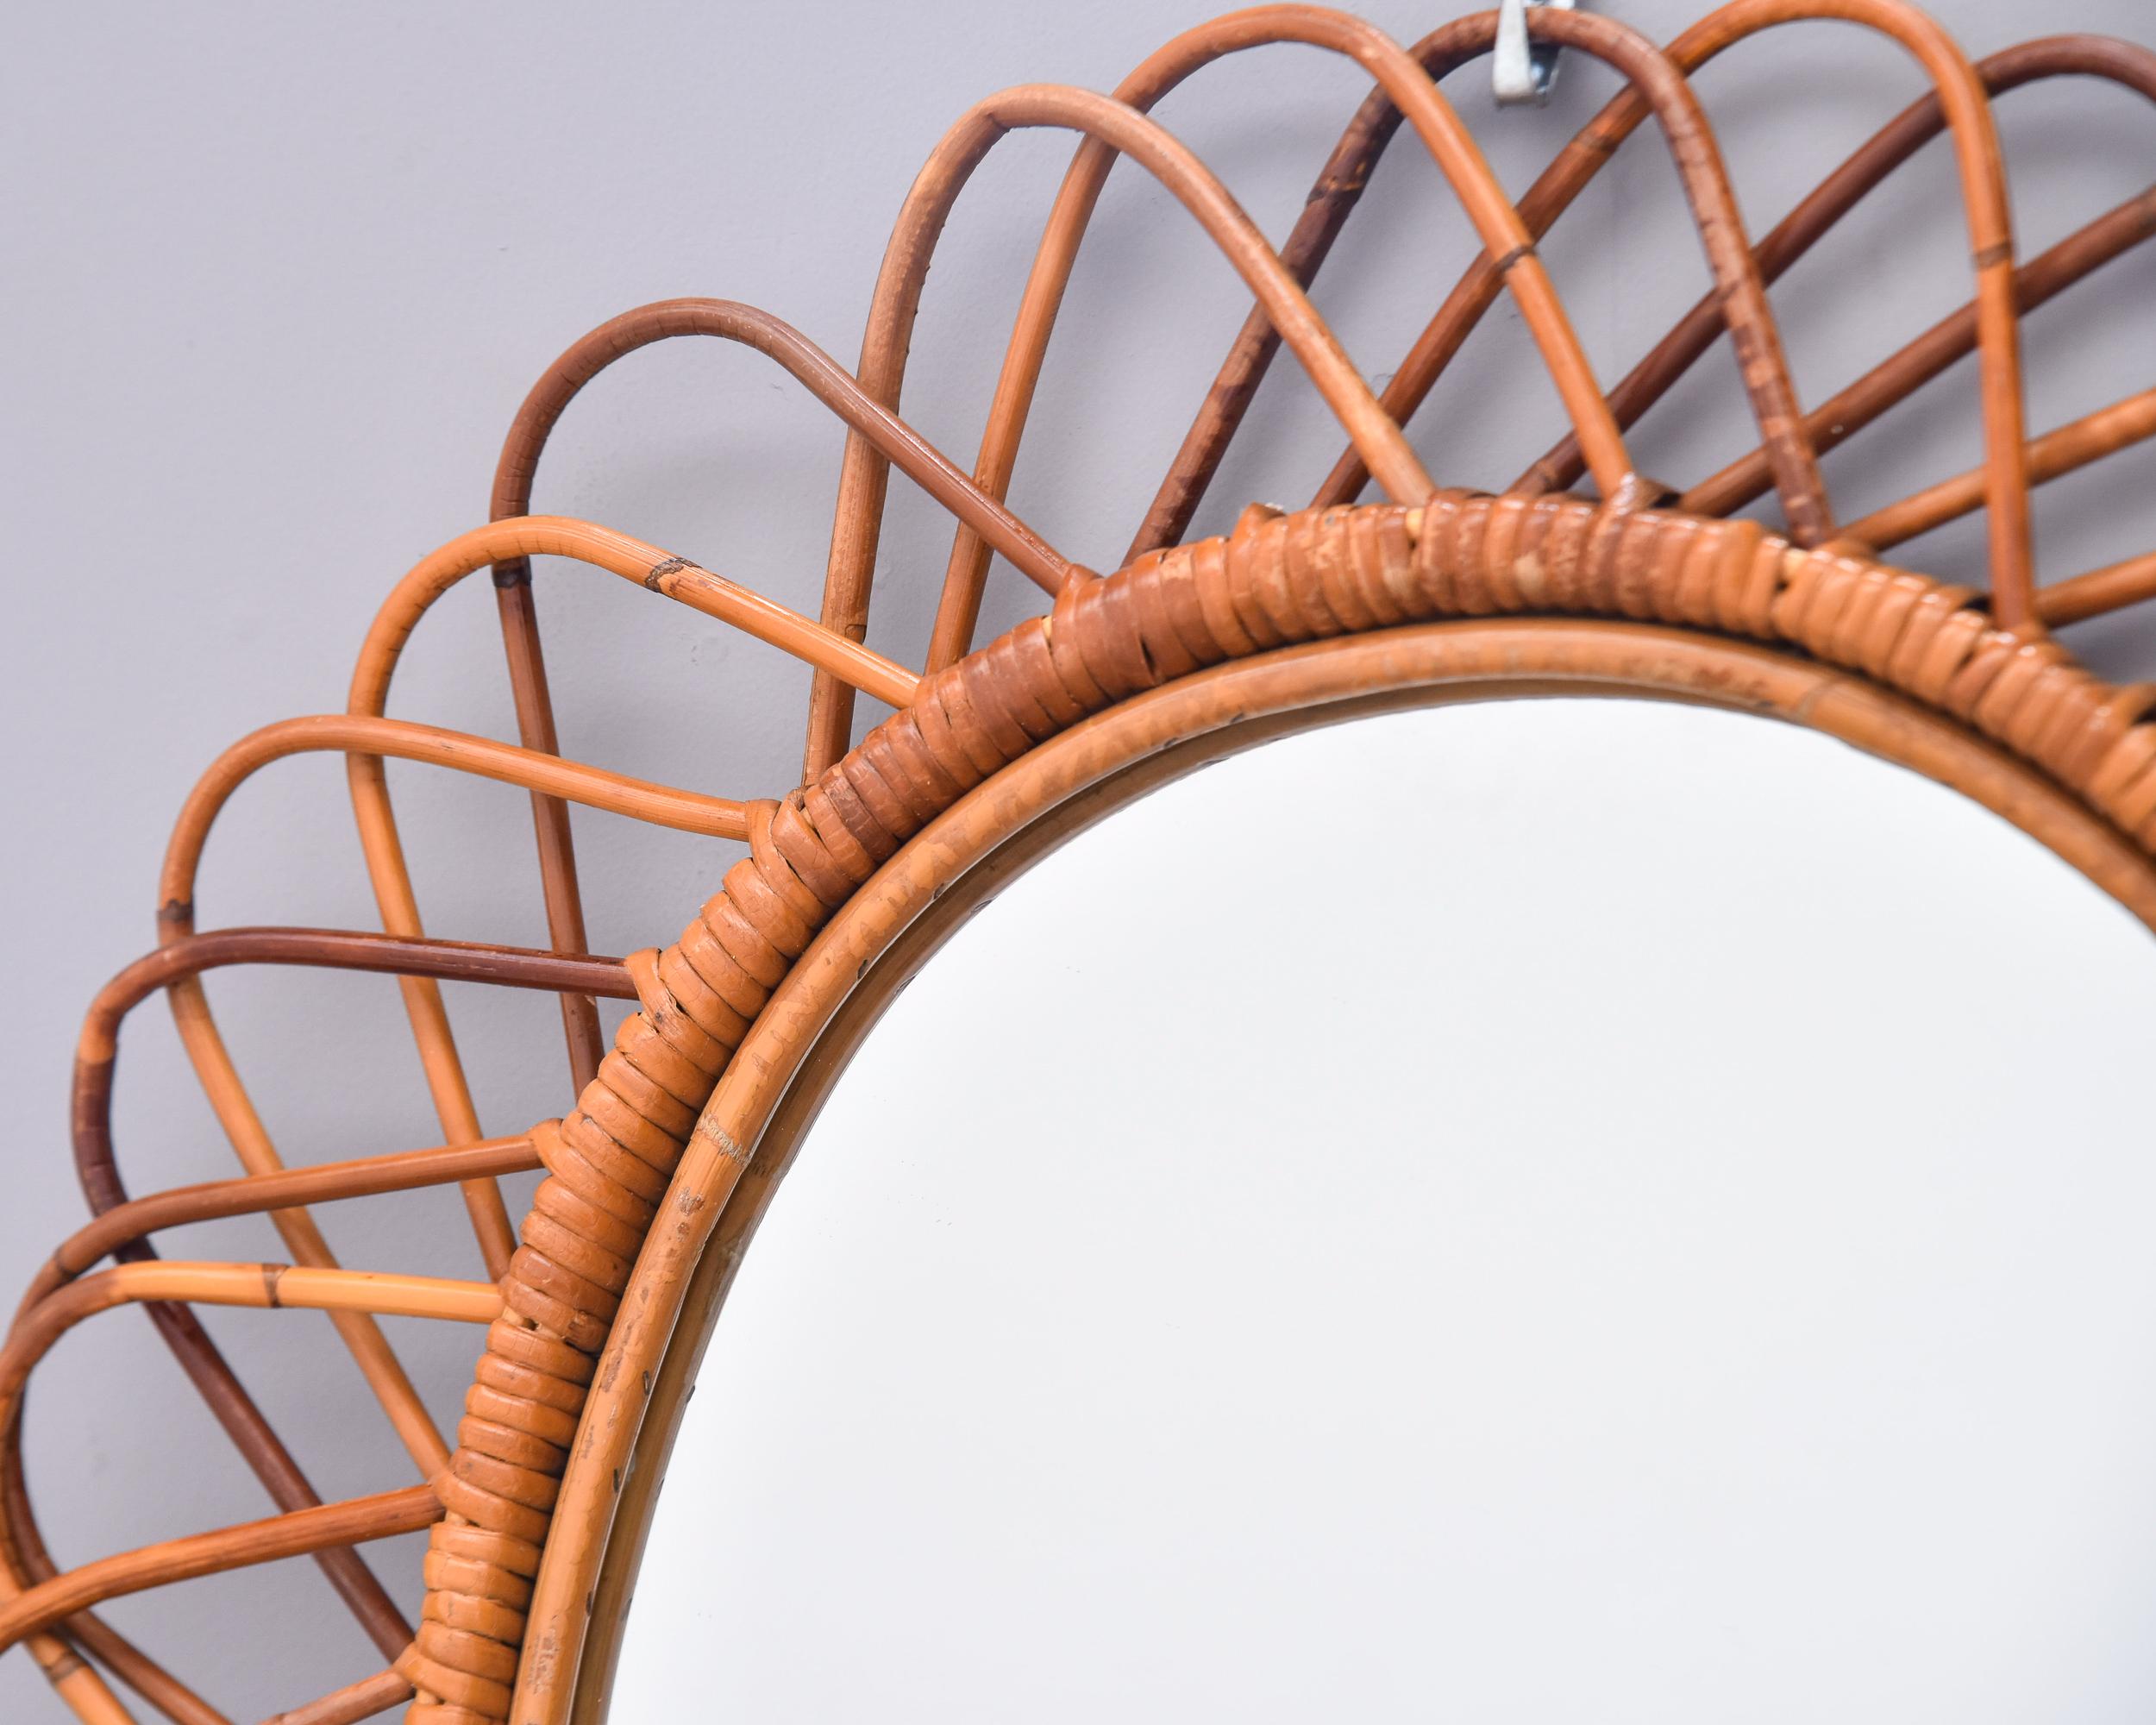 Midcentury Oval Mirror with Woven Rattan or Wicker Frame 1